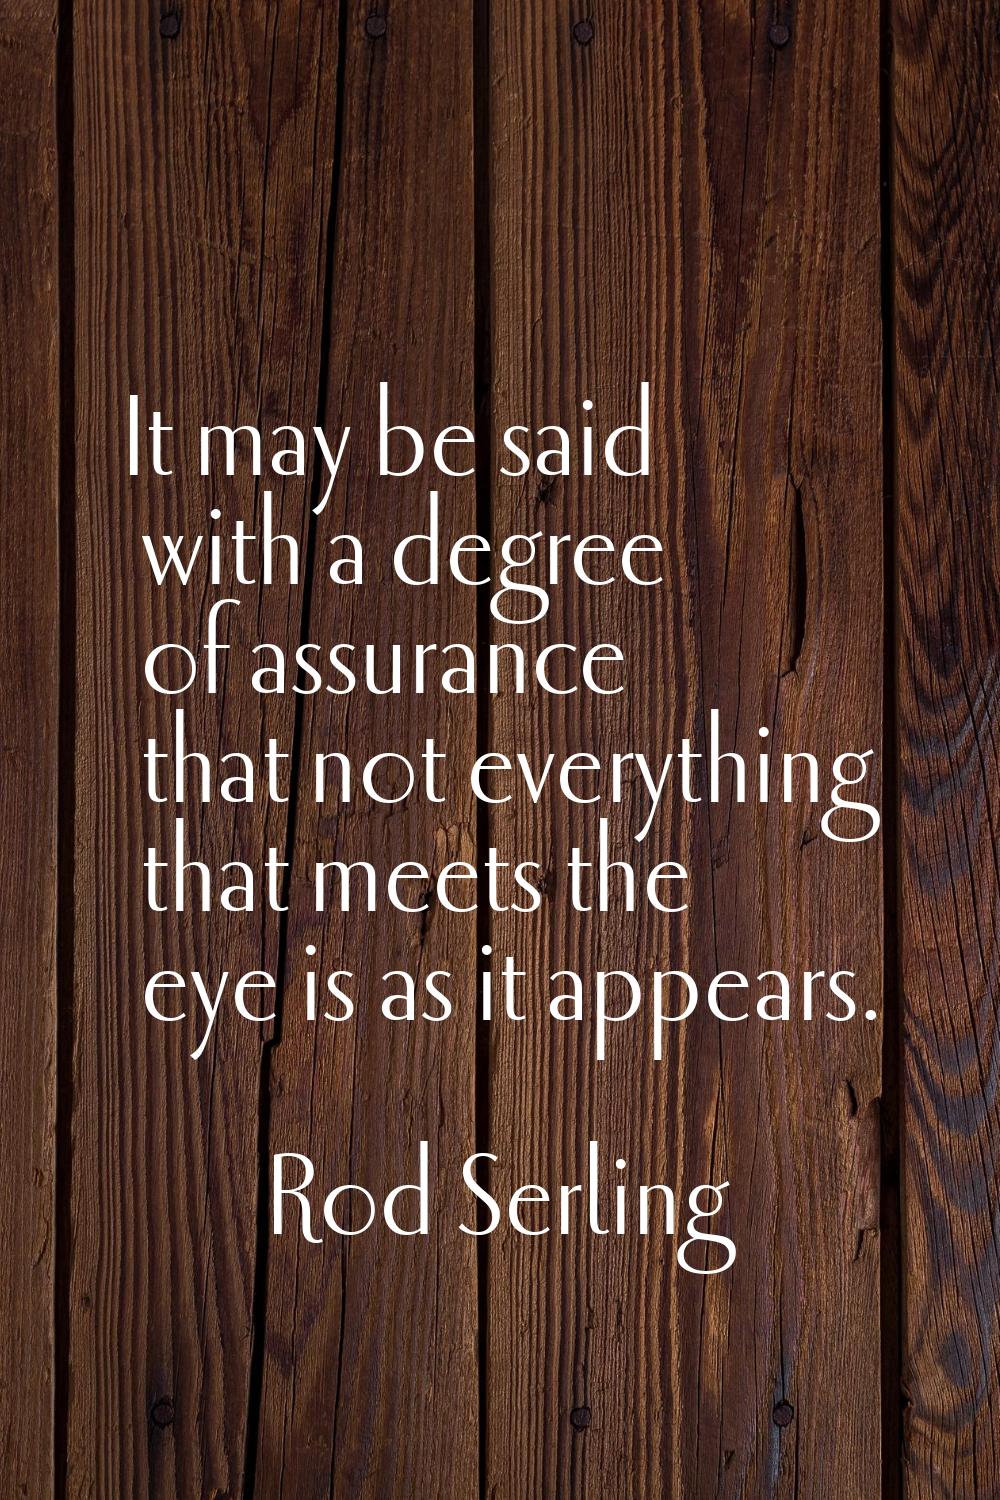 It may be said with a degree of assurance that not everything that meets the eye is as it appears.